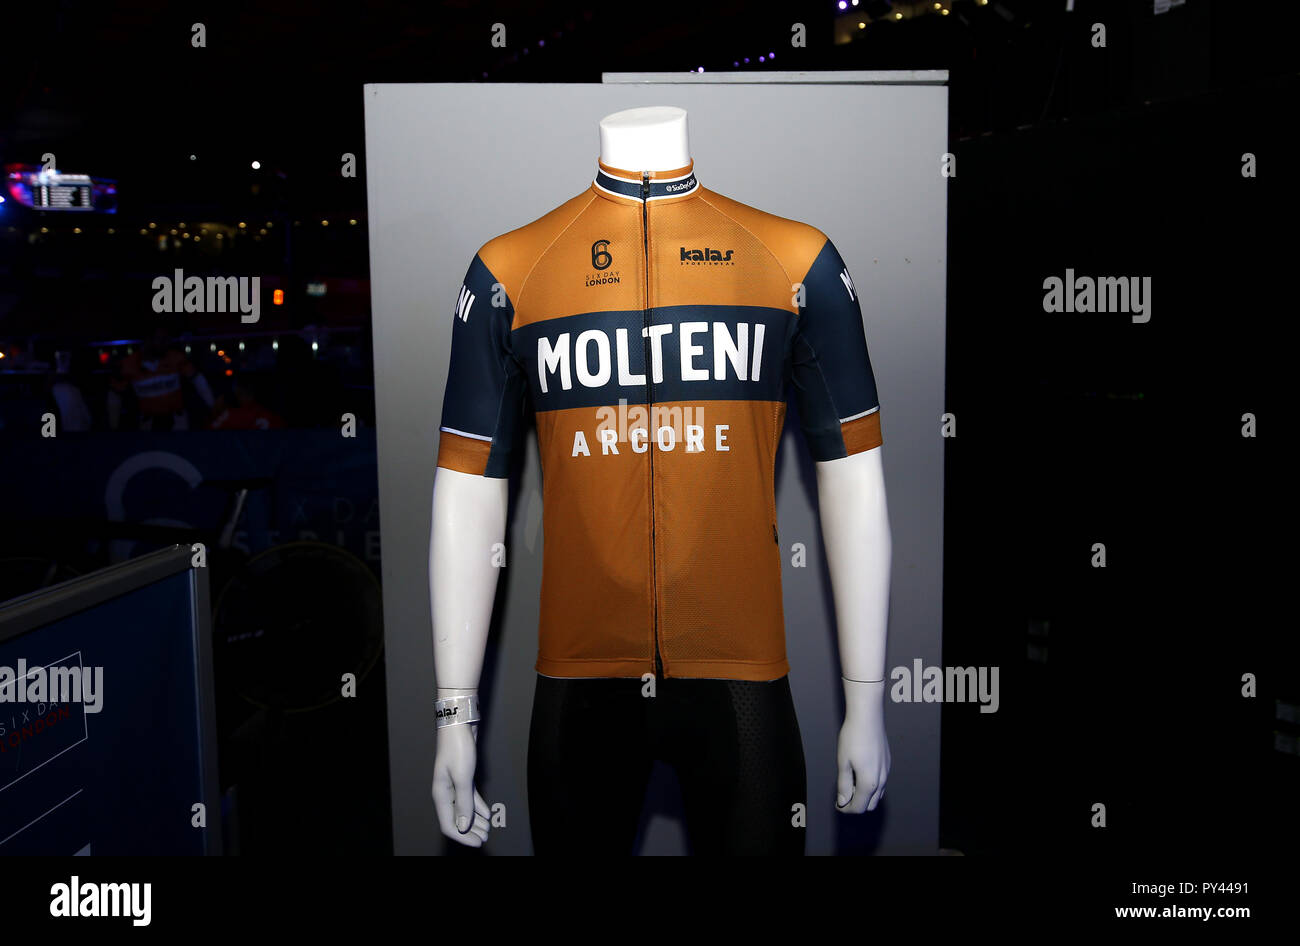 General view of the new Molteni shirts on display Stock Photo - Alamy